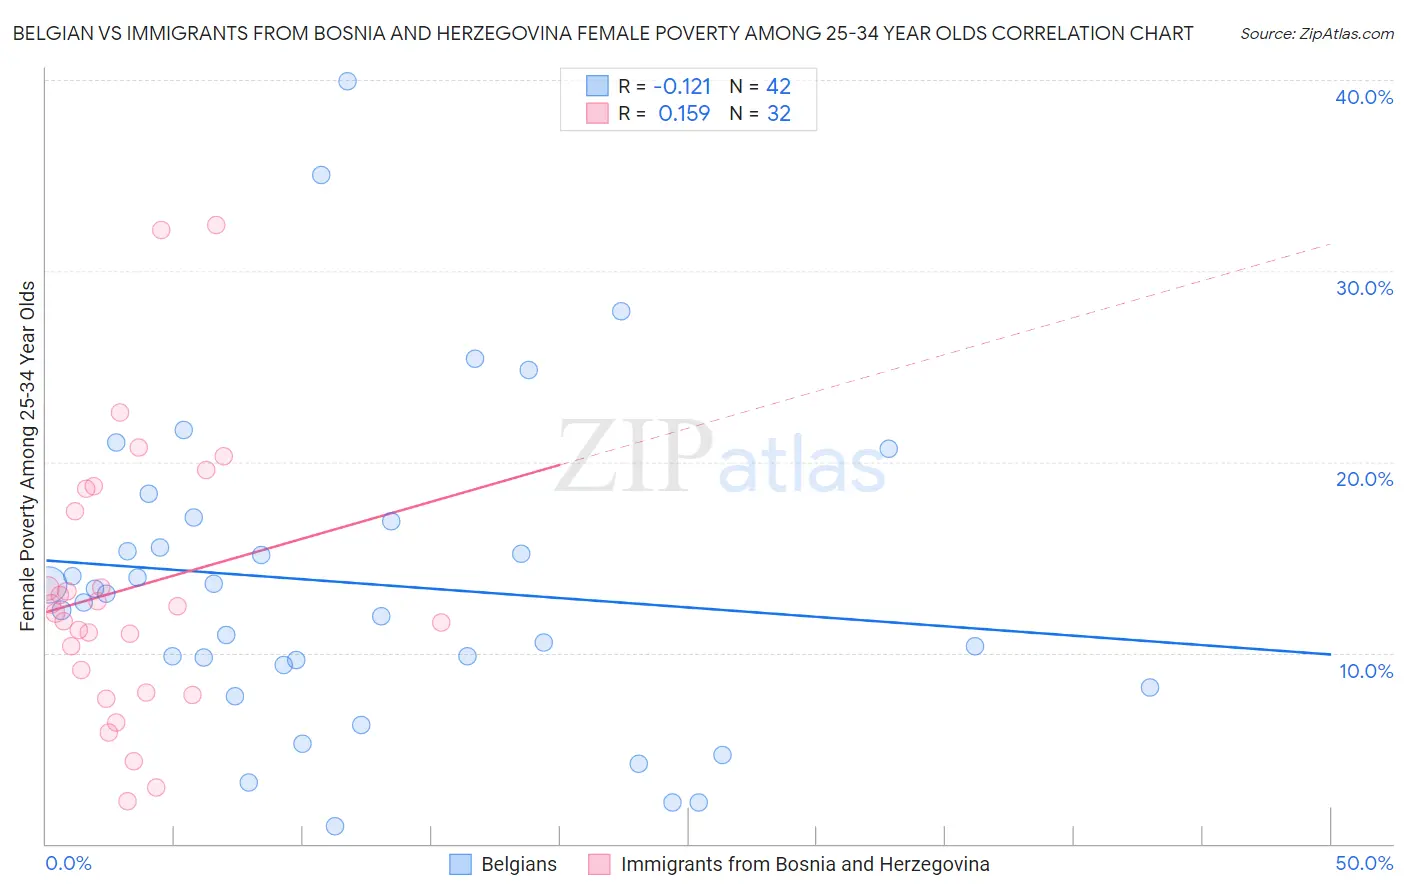 Belgian vs Immigrants from Bosnia and Herzegovina Female Poverty Among 25-34 Year Olds